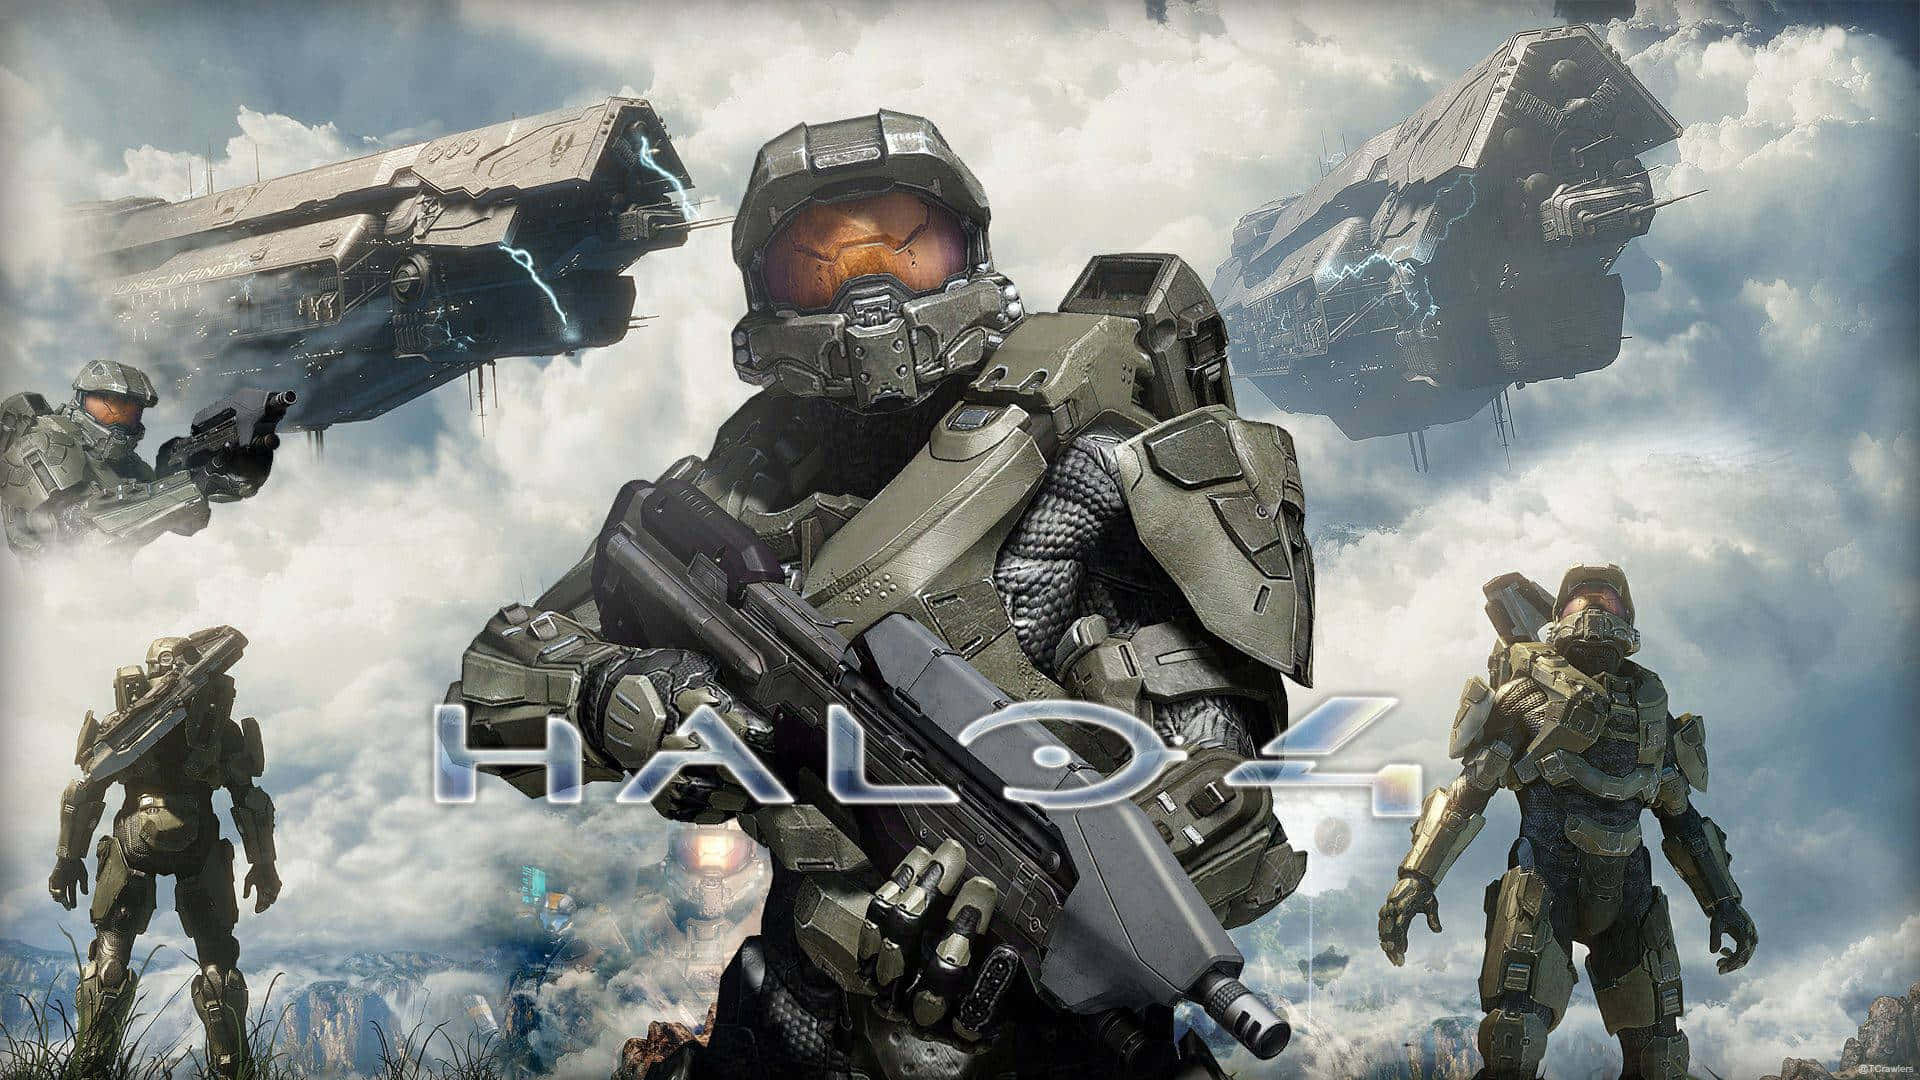 Master Chief, the formidable Spartan soldier, stands tall amidst the breathtaking expanse of the Halo Ring.